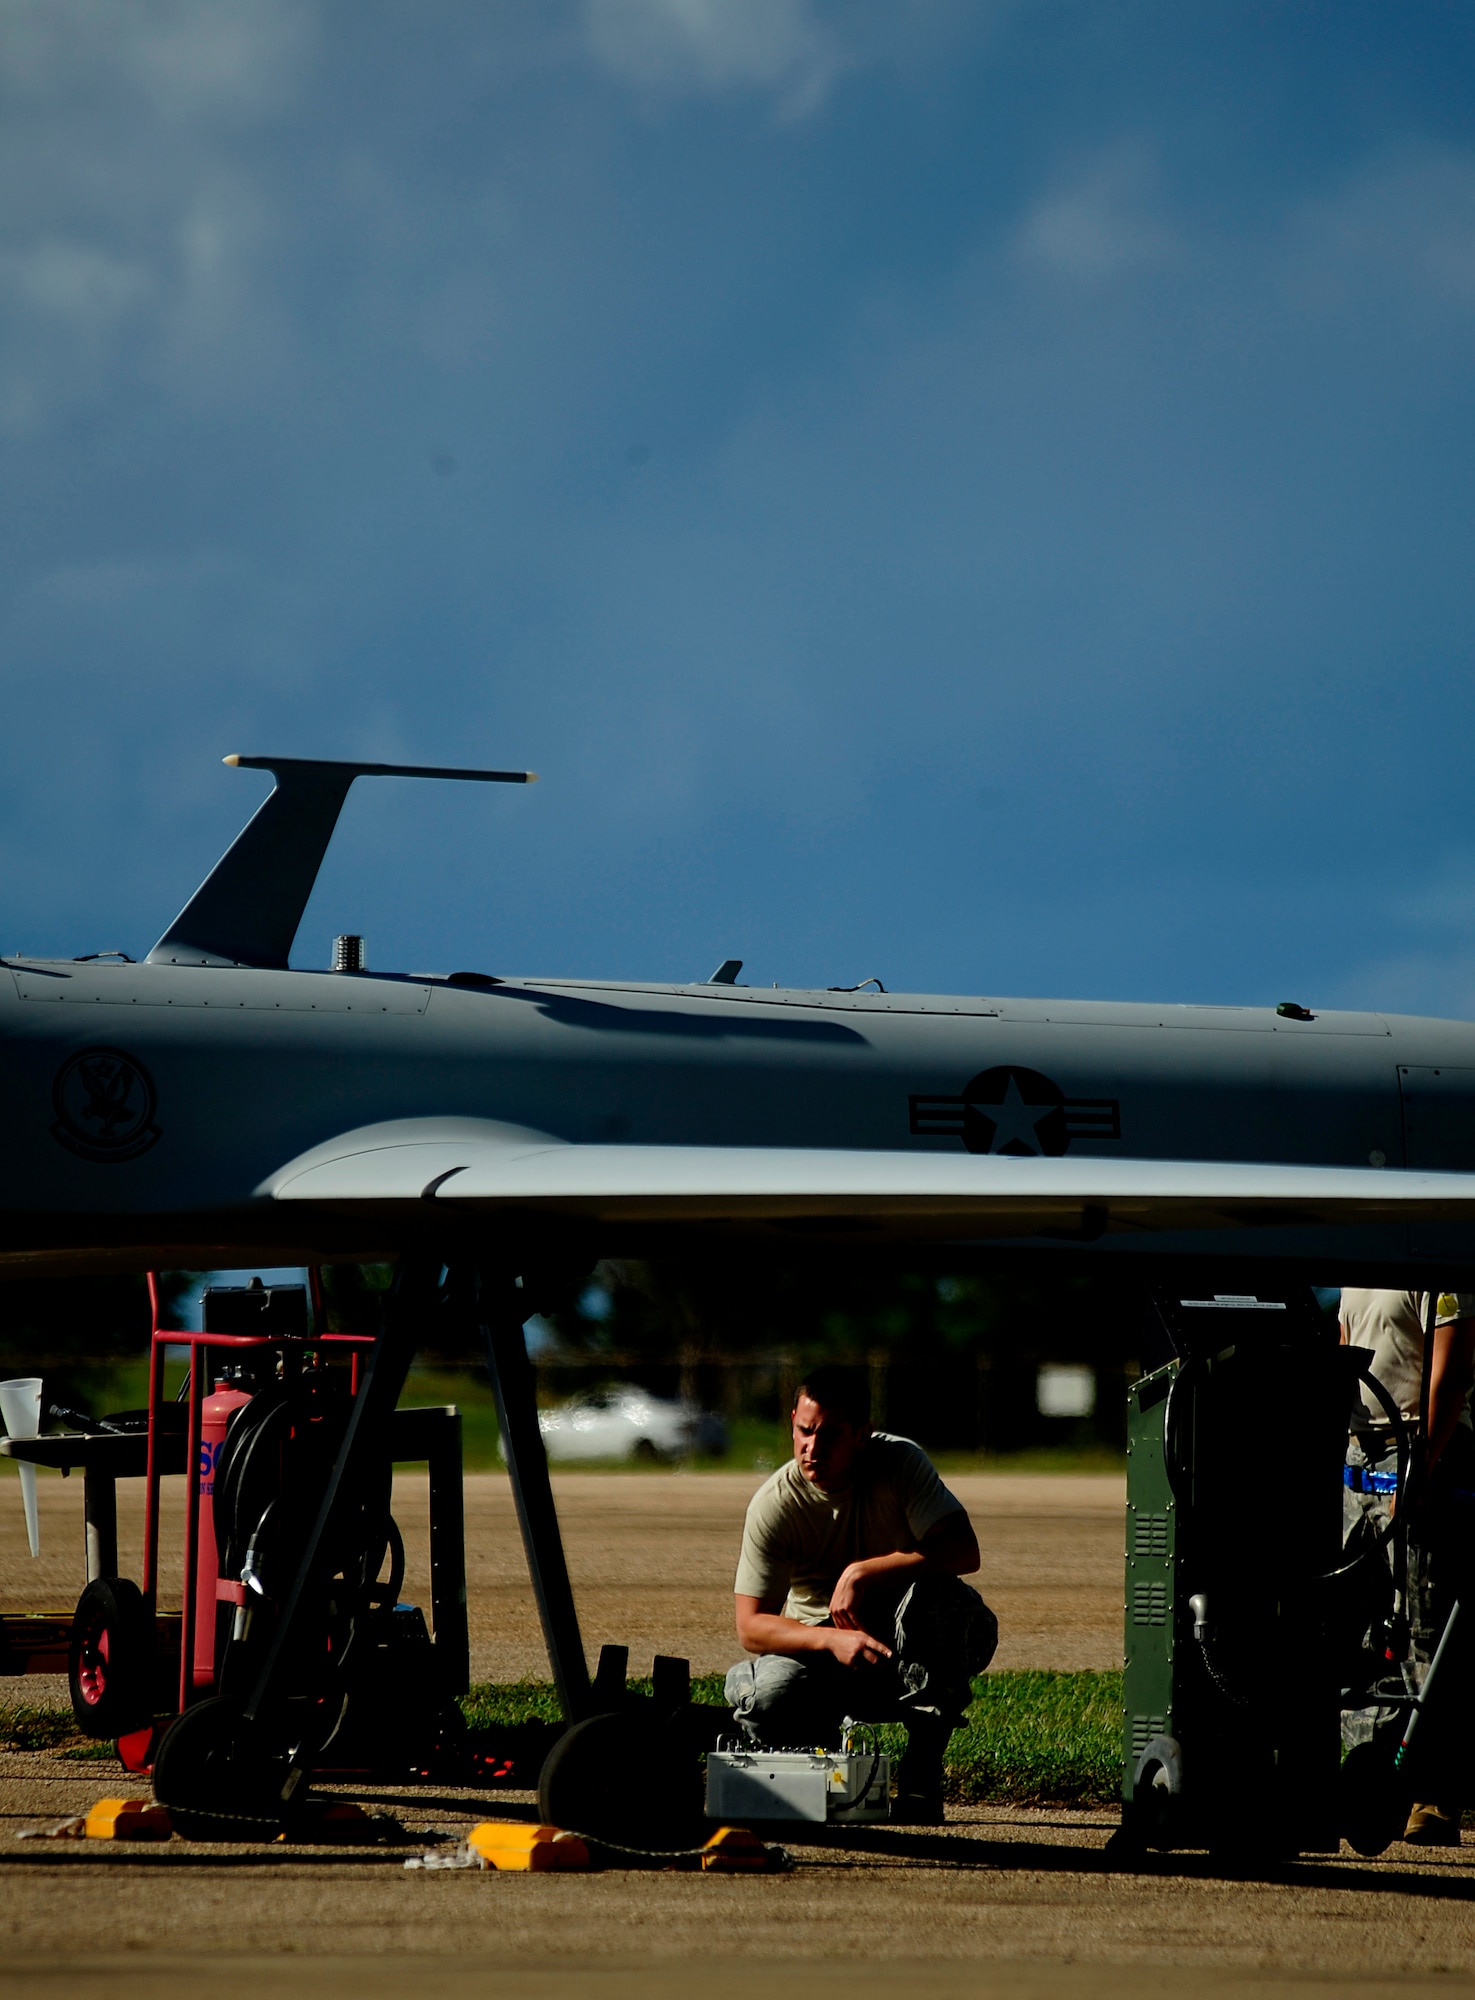 U.S. Air Force from the 432nd Aircraft Maintenance Sq., Creech Air Force Base, Nevada conducts pre-flight maintenance on an RQ-1 Predator at Aeropuerto Rafael Hernandez outside Aguadilla, Puerto Rico on 28 Jan., 2010.  The RQ-1 remotely piloted systems are operating out of Puerto Rico in support of Operation Unified Response in Haiti.  Airmen from Creech Air Force Base, Las Vegas, Nev. are providing 24 hour a day full-motion video in real time to international relief workers on the ground in order to speed humanitarian aid to remote and cut-off areas of the country following the earthquake on 12 Jan., 2010. (U.S. Air Force photo by Tech. Sgt. James L. Harper Jr.)